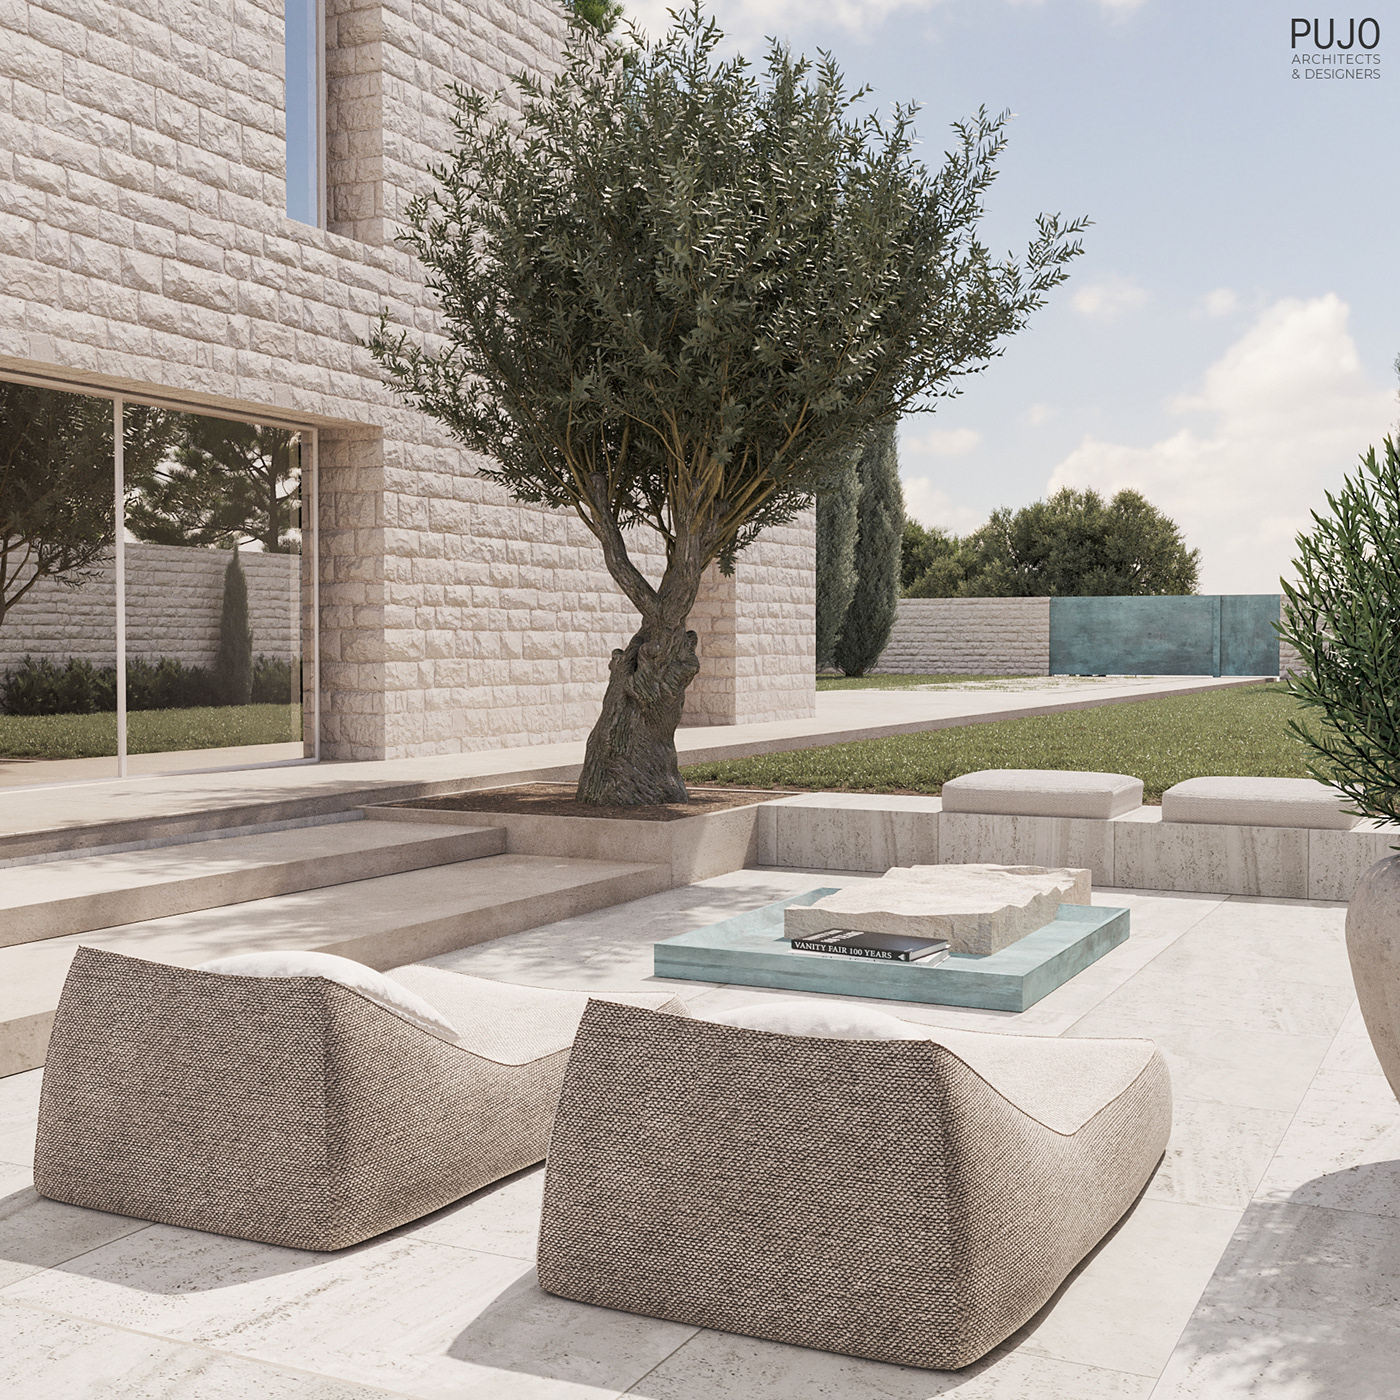 Luxury Design luxury homes PUJO ARCHITECTS PUJO A&D exterior Pool stone Outdoor Natural Stone Modern Exterior 